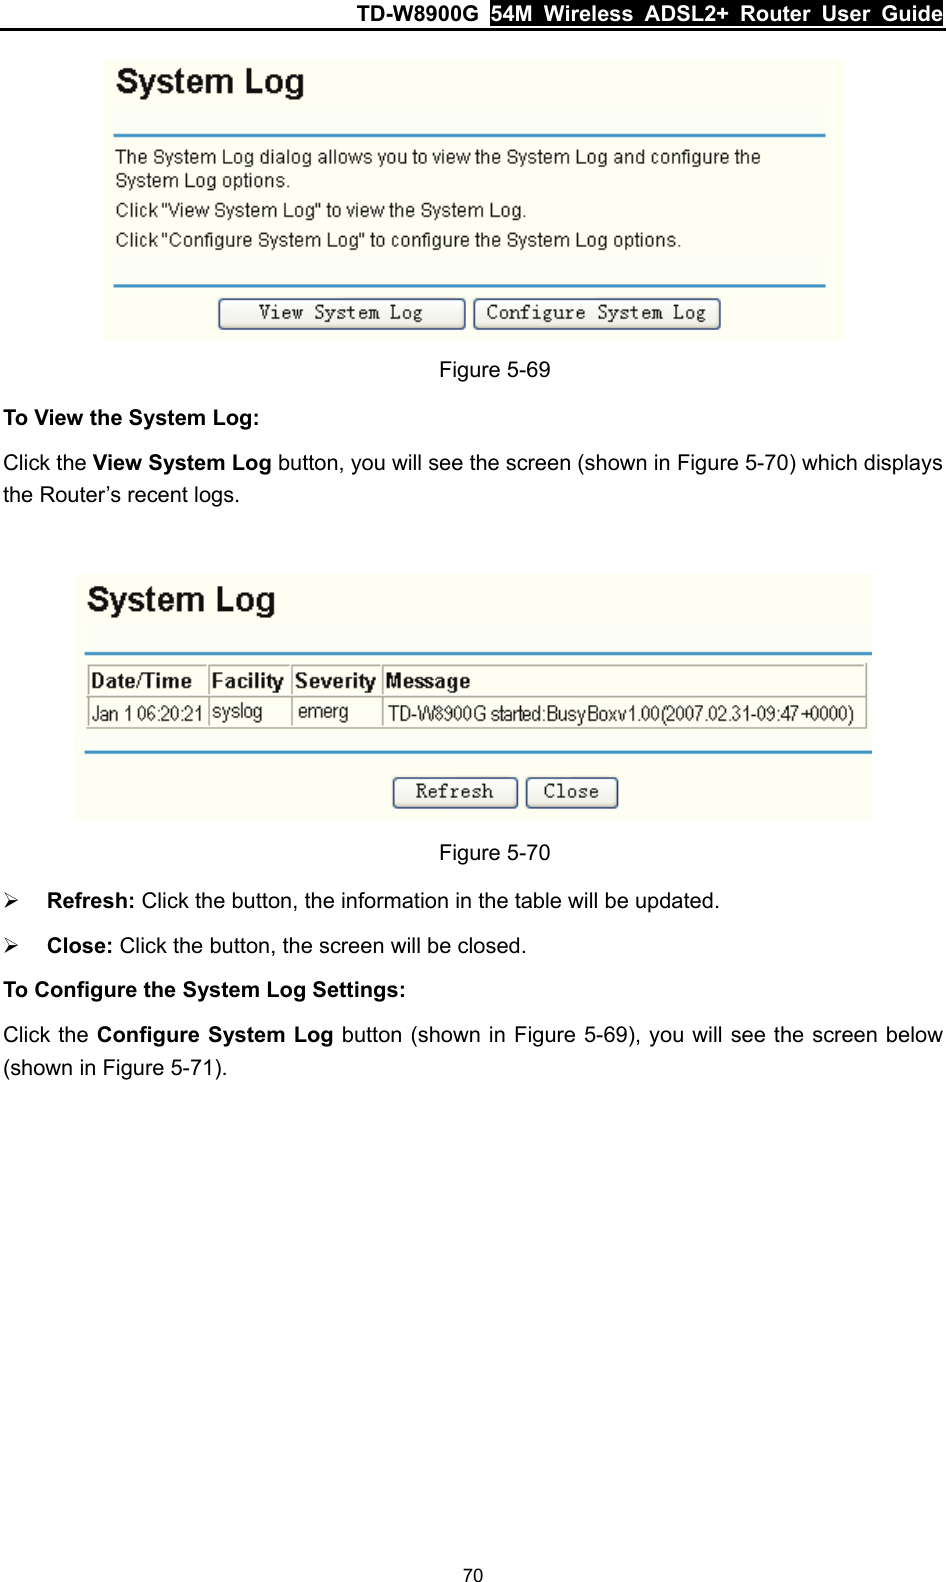 TD-W8900G  54M Wireless ADSL2+ Router User Guide 70  Figure 5-69 To View the System Log: Click the View System Log button, you will see the screen (shown in Figure 5-70) which displays the Router’s recent logs.   Figure 5-70 ¾ Refresh: Click the button, the information in the table will be updated. ¾ Close: Click the button, the screen will be closed. To Configure the System Log Settings: Click the Configure System Log button (shown in Figure 5-69), you will see the screen below (shown in Figure 5-71). 